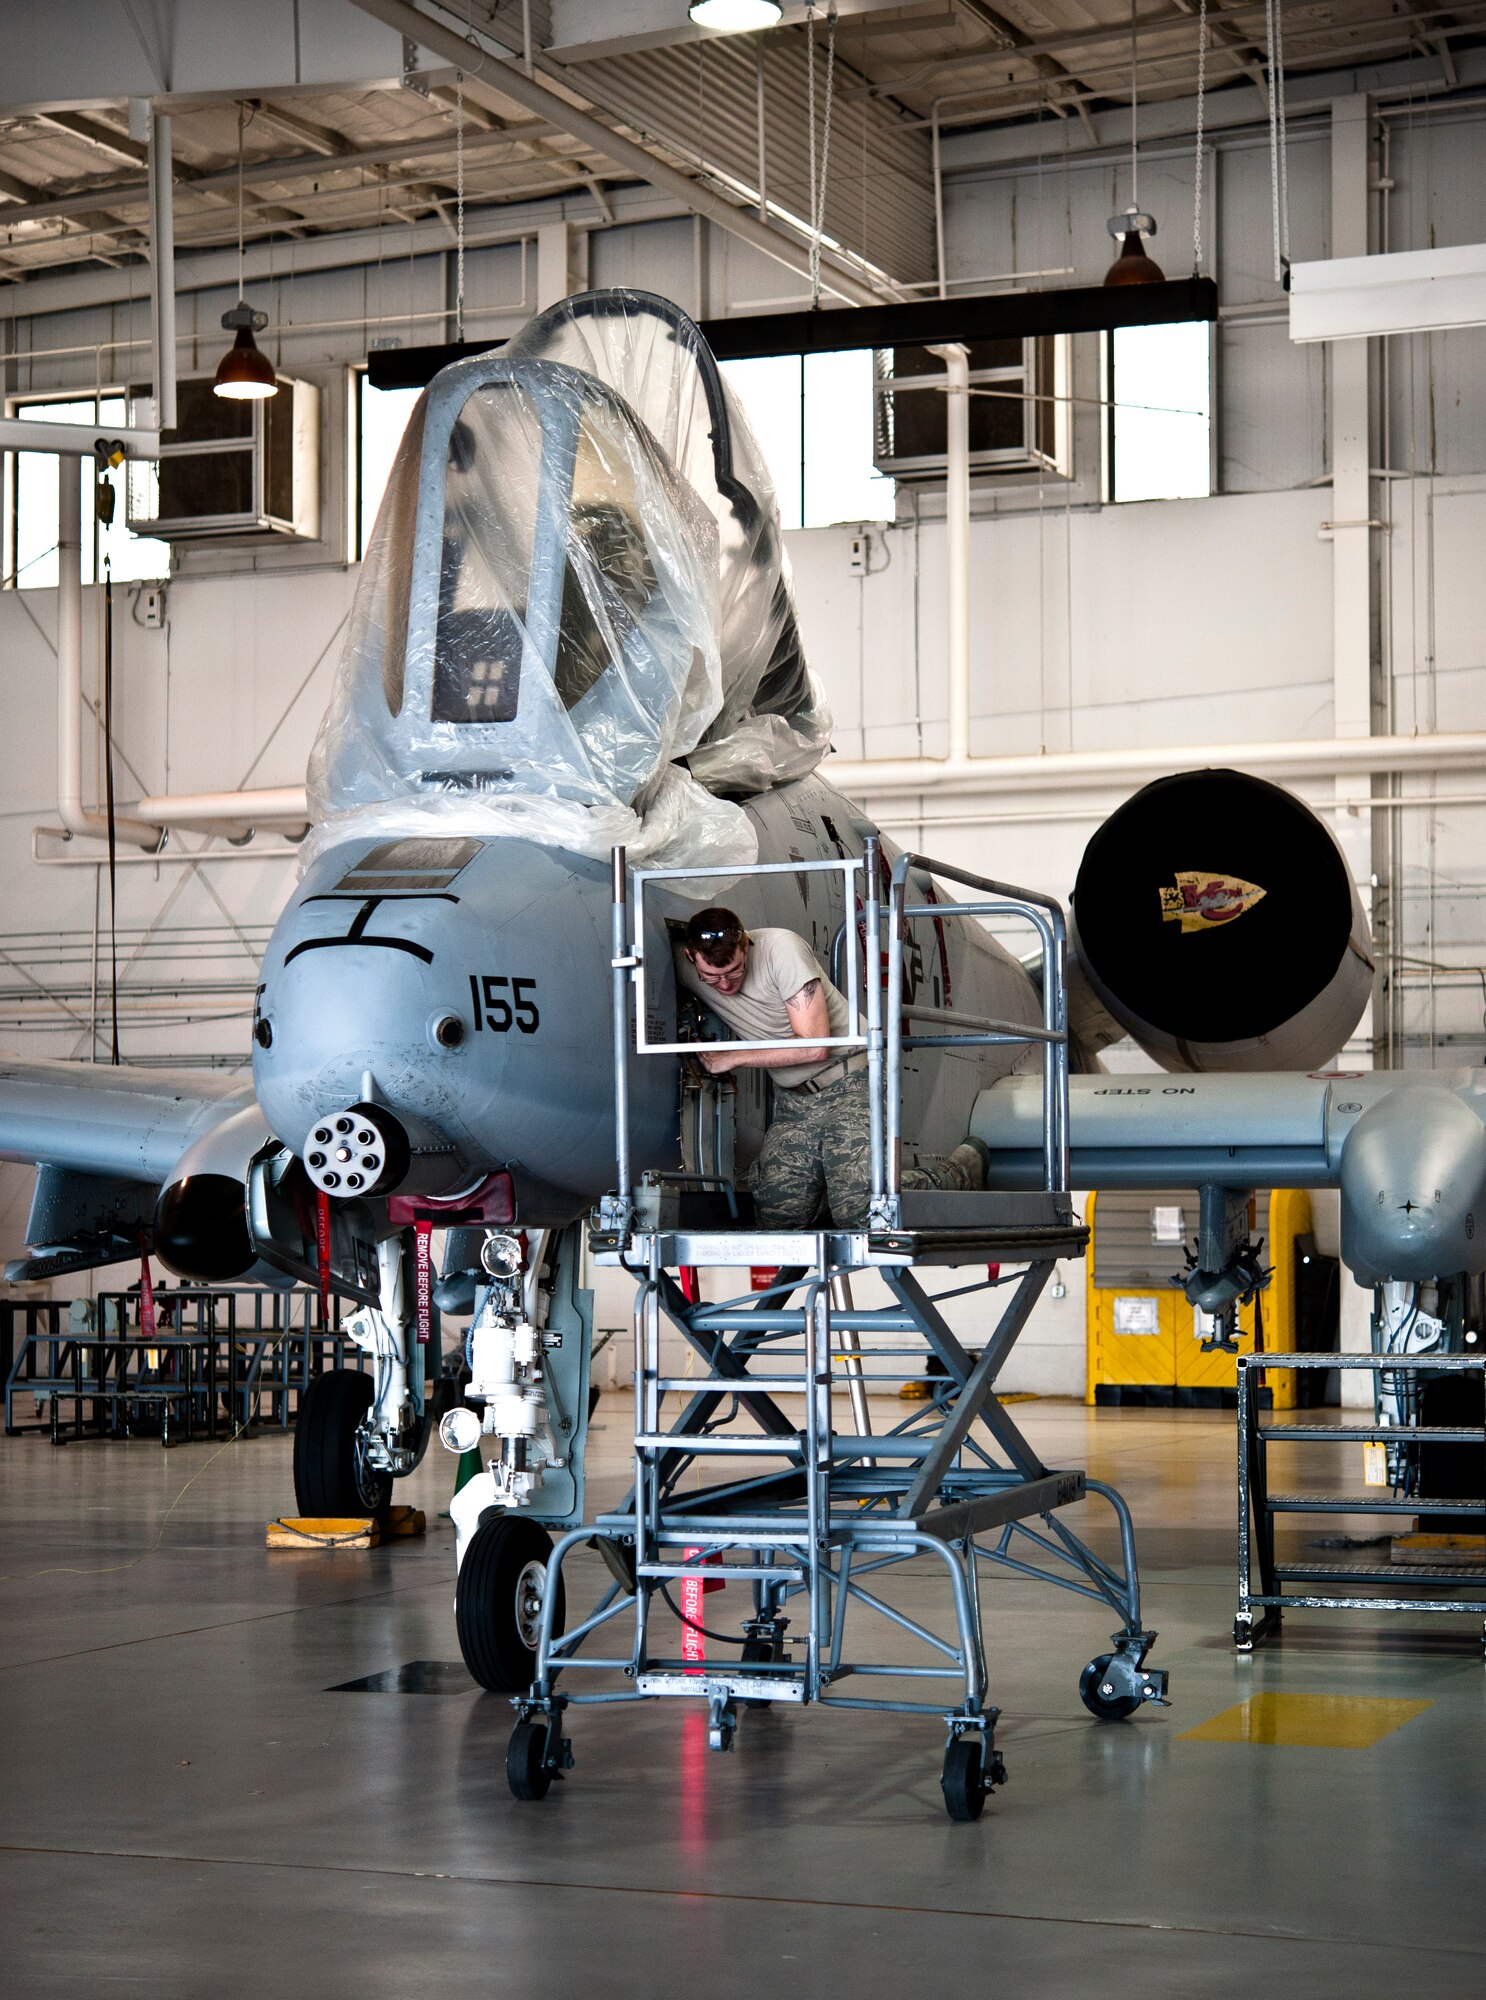 Senior Airman Daniel Hensley, 442nd Aircraft Maintenance Squadron electro-environmental technician from Sedalia, Missouri, performs maintenance work on an A-10 Thunderbolt II, May 15, 2014 at Whiteman Air Force Base, Missouri. Electro-environment technicians are responsible for performing and supervising aircraft electrical and environmental functions and activities. (U.S. Air Force photo by Senior Airman Daniel Phelps/Released)